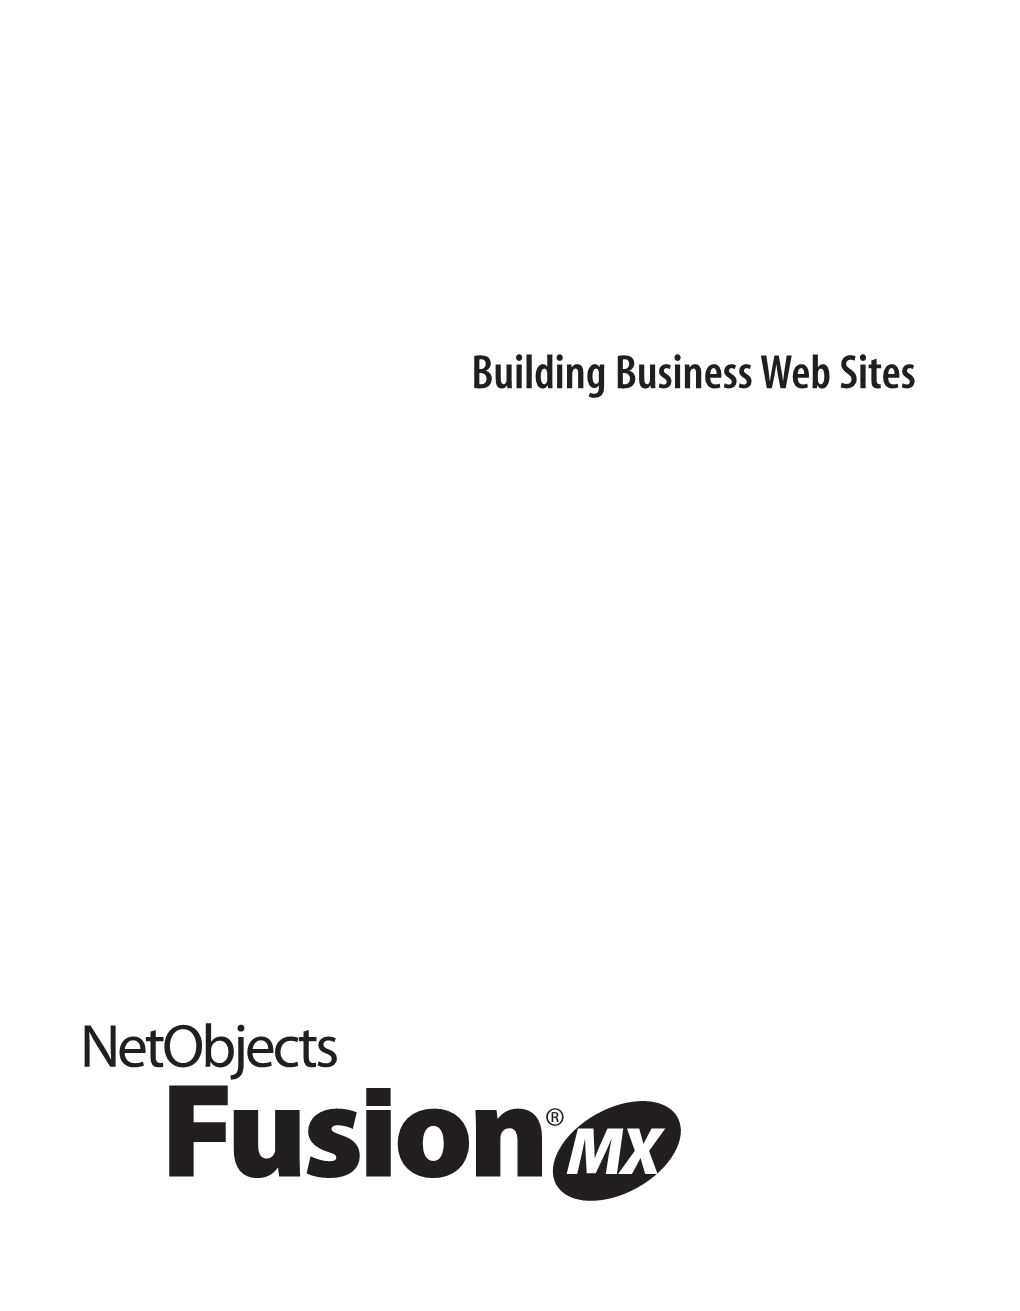 Building Business Web Sites Boombbws.Book Page Ii Sunday, February 18, 2001 8:42 PM